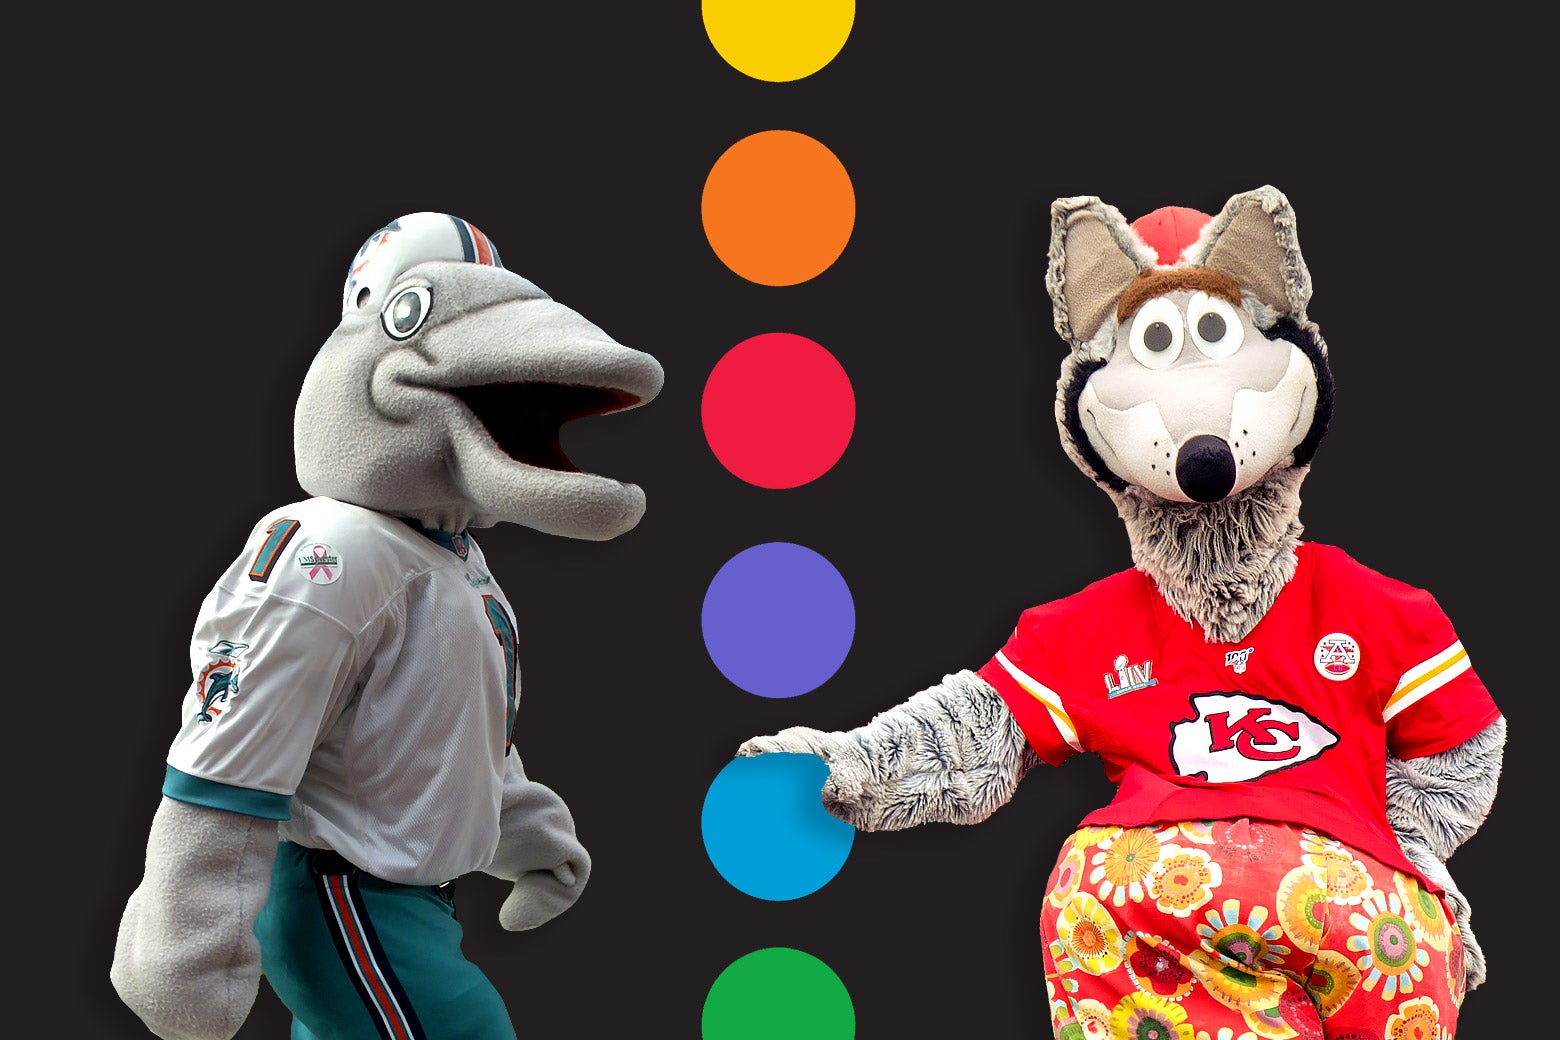 The mascots for the Kansas City Chiefs and the Miami Dolphins separated down the middle with a rainbow dotted line.